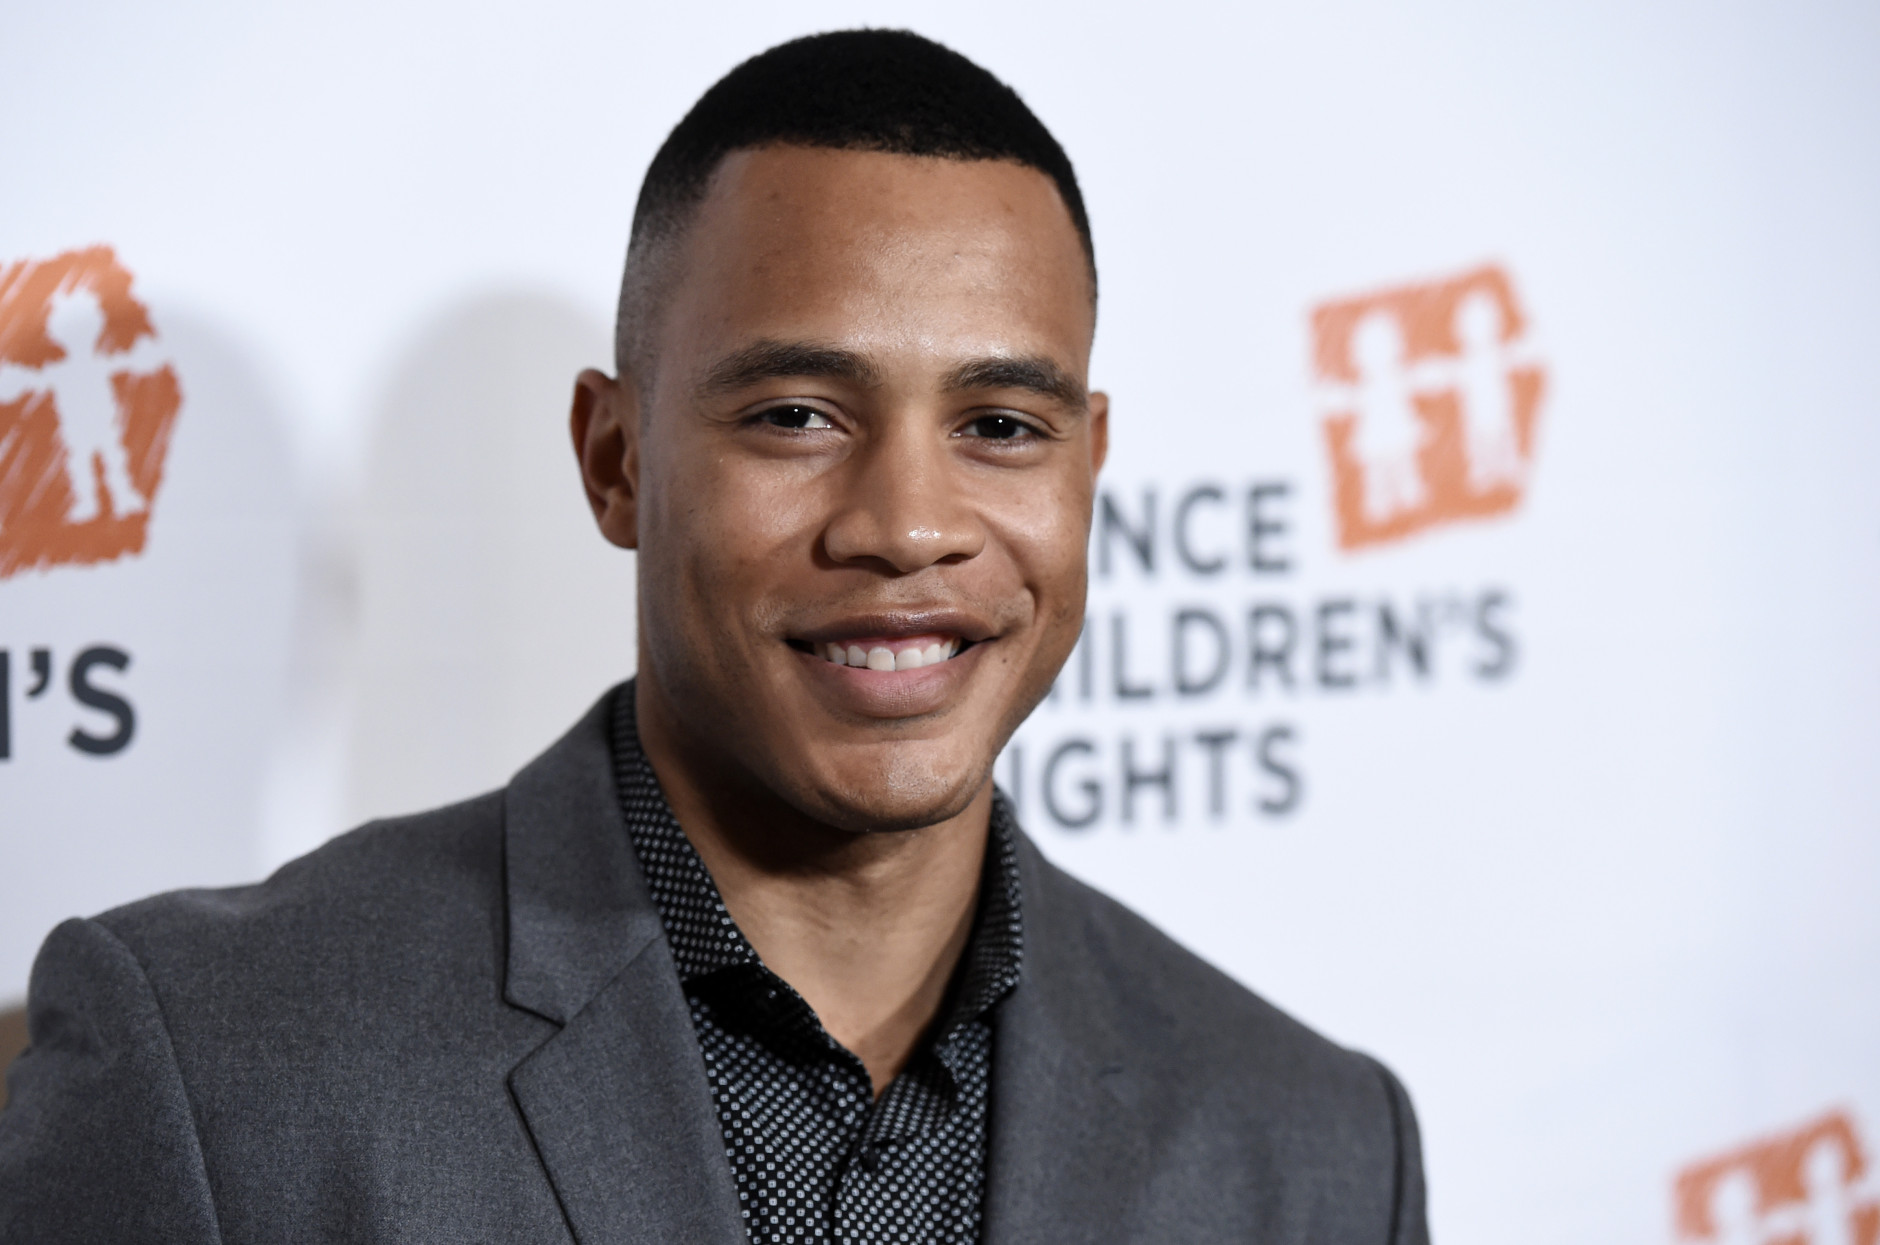 Actor Trai Byers poses at The Alliance for Children's Rights' 24th Annual Dinner at the Beverly Hilton on Thursday, March 10, 2016, in Beverly Hills, Calif. (Photo by Chris Pizzello/Invision/AP)